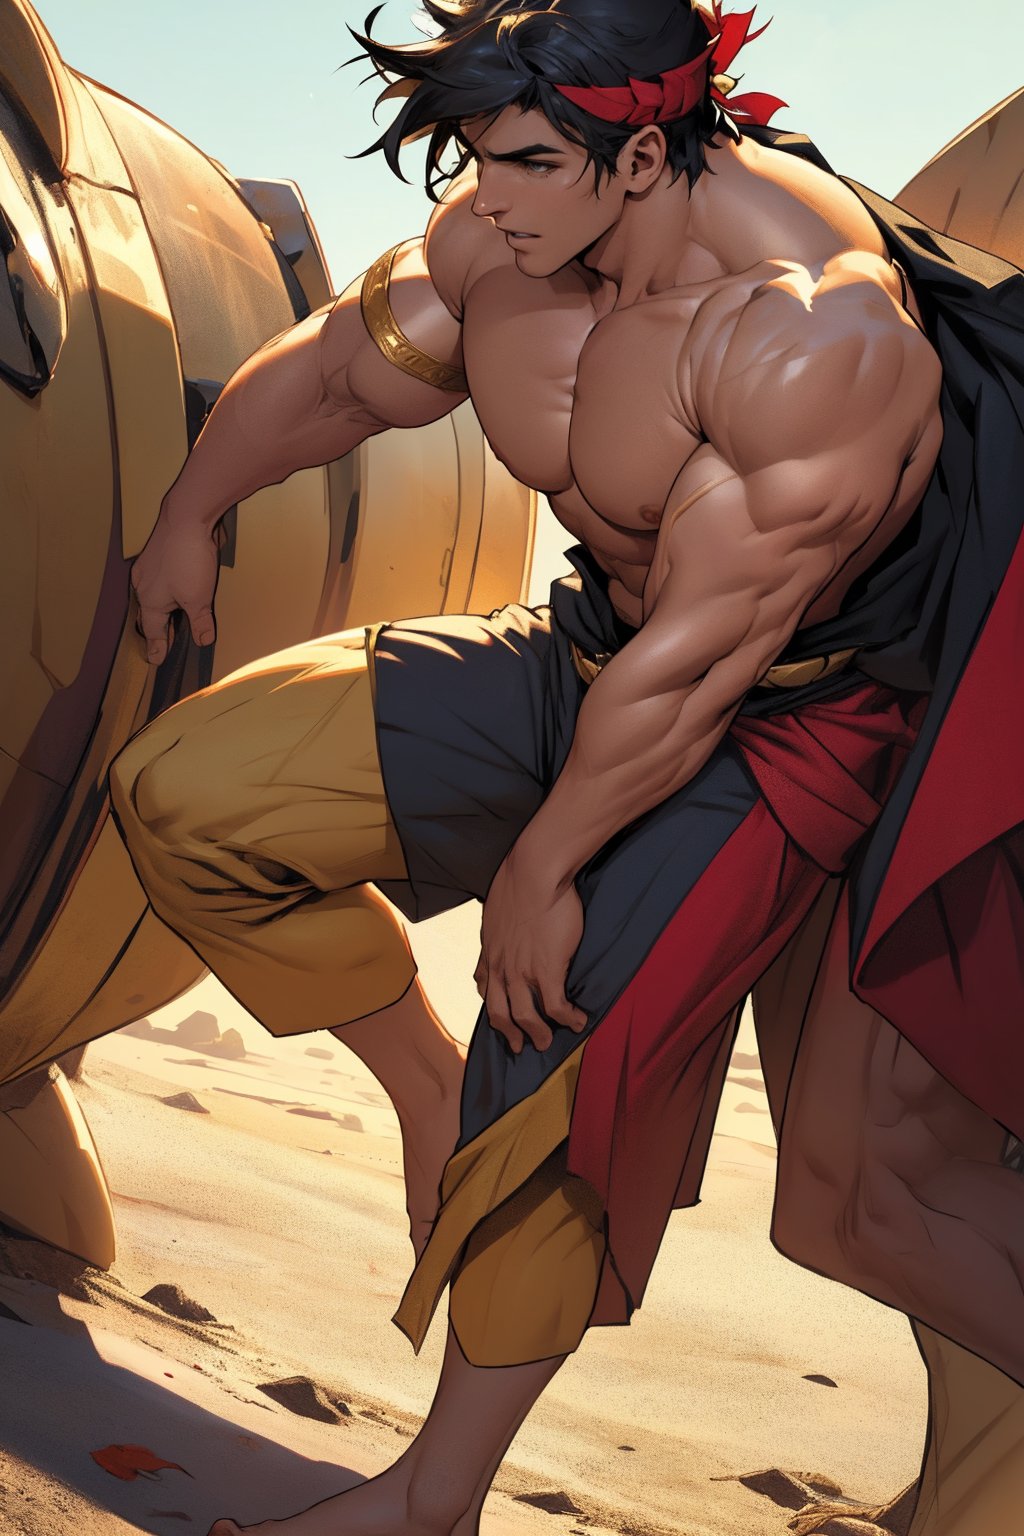 Close-up shot of Zagreus's chiseled physique, showcasing his broad chest, bulging biceps, and powerful shoulders, all exposed and gleaming in the warm golden light. The camera frames his muscular form against a neutral background, emphasizing the contours of his body as he stands confidently with his weight evenly distributed on both feet.